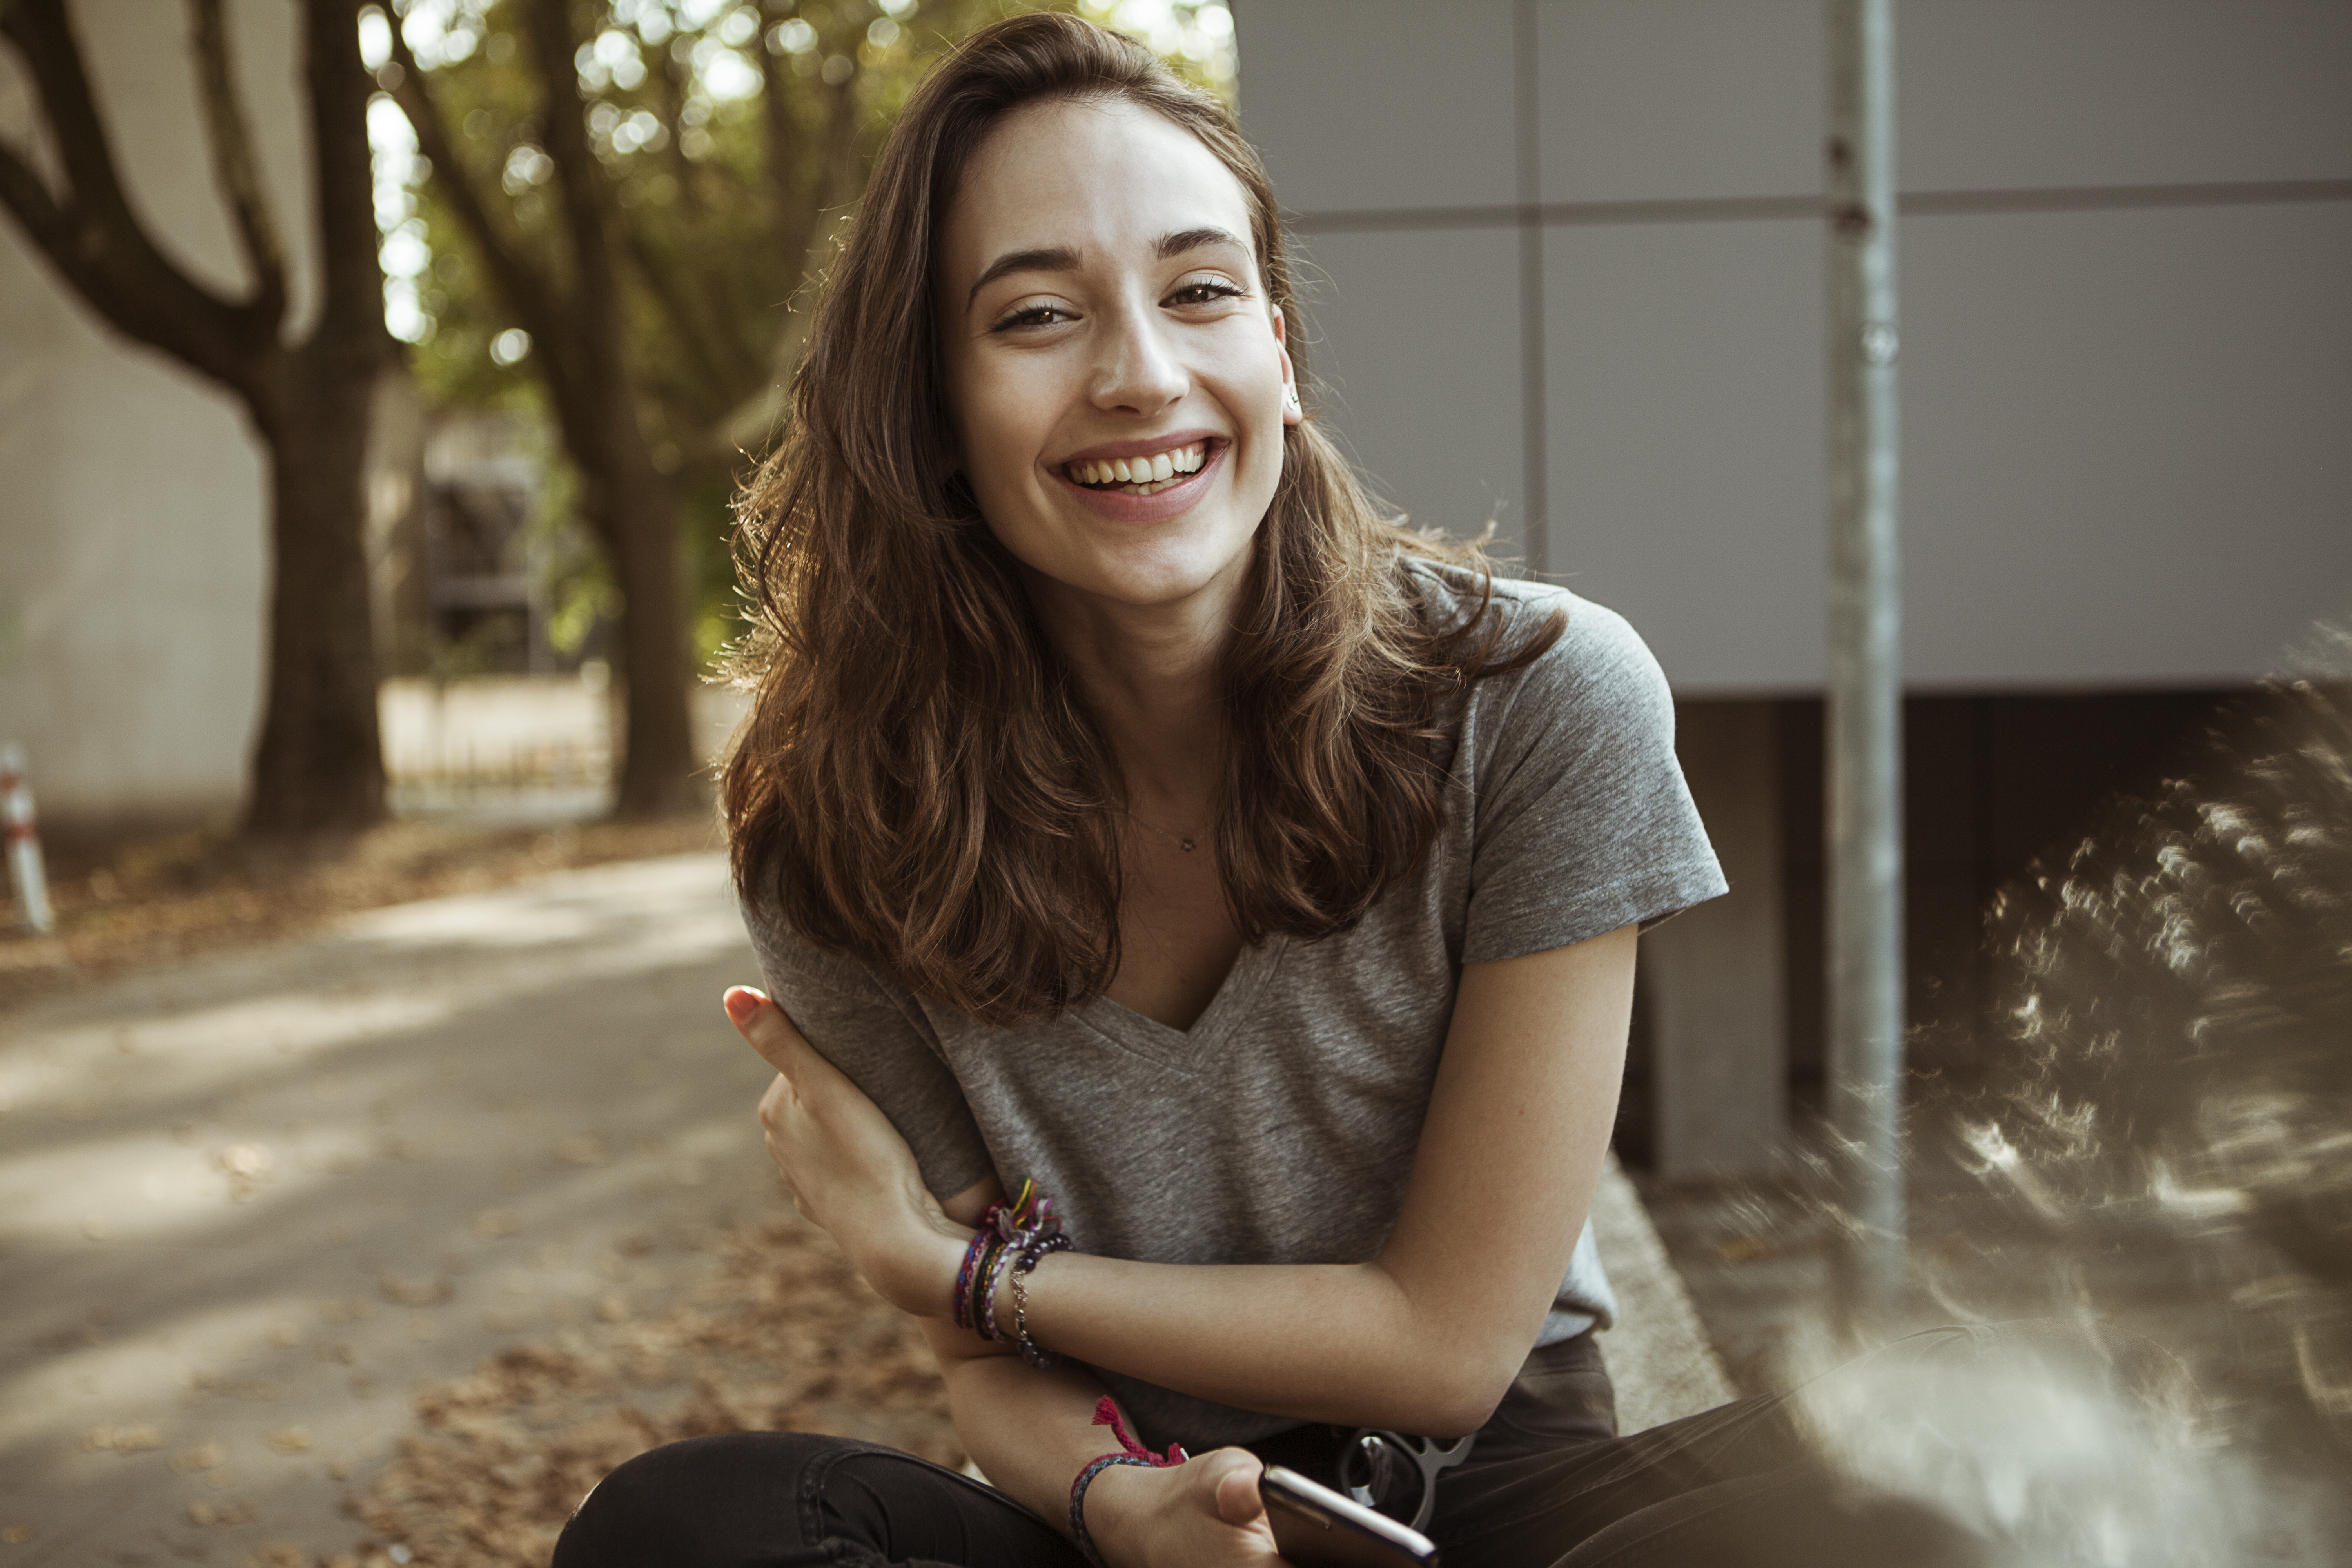 Portrait of happy young woman outdoors | Source: Getty Images